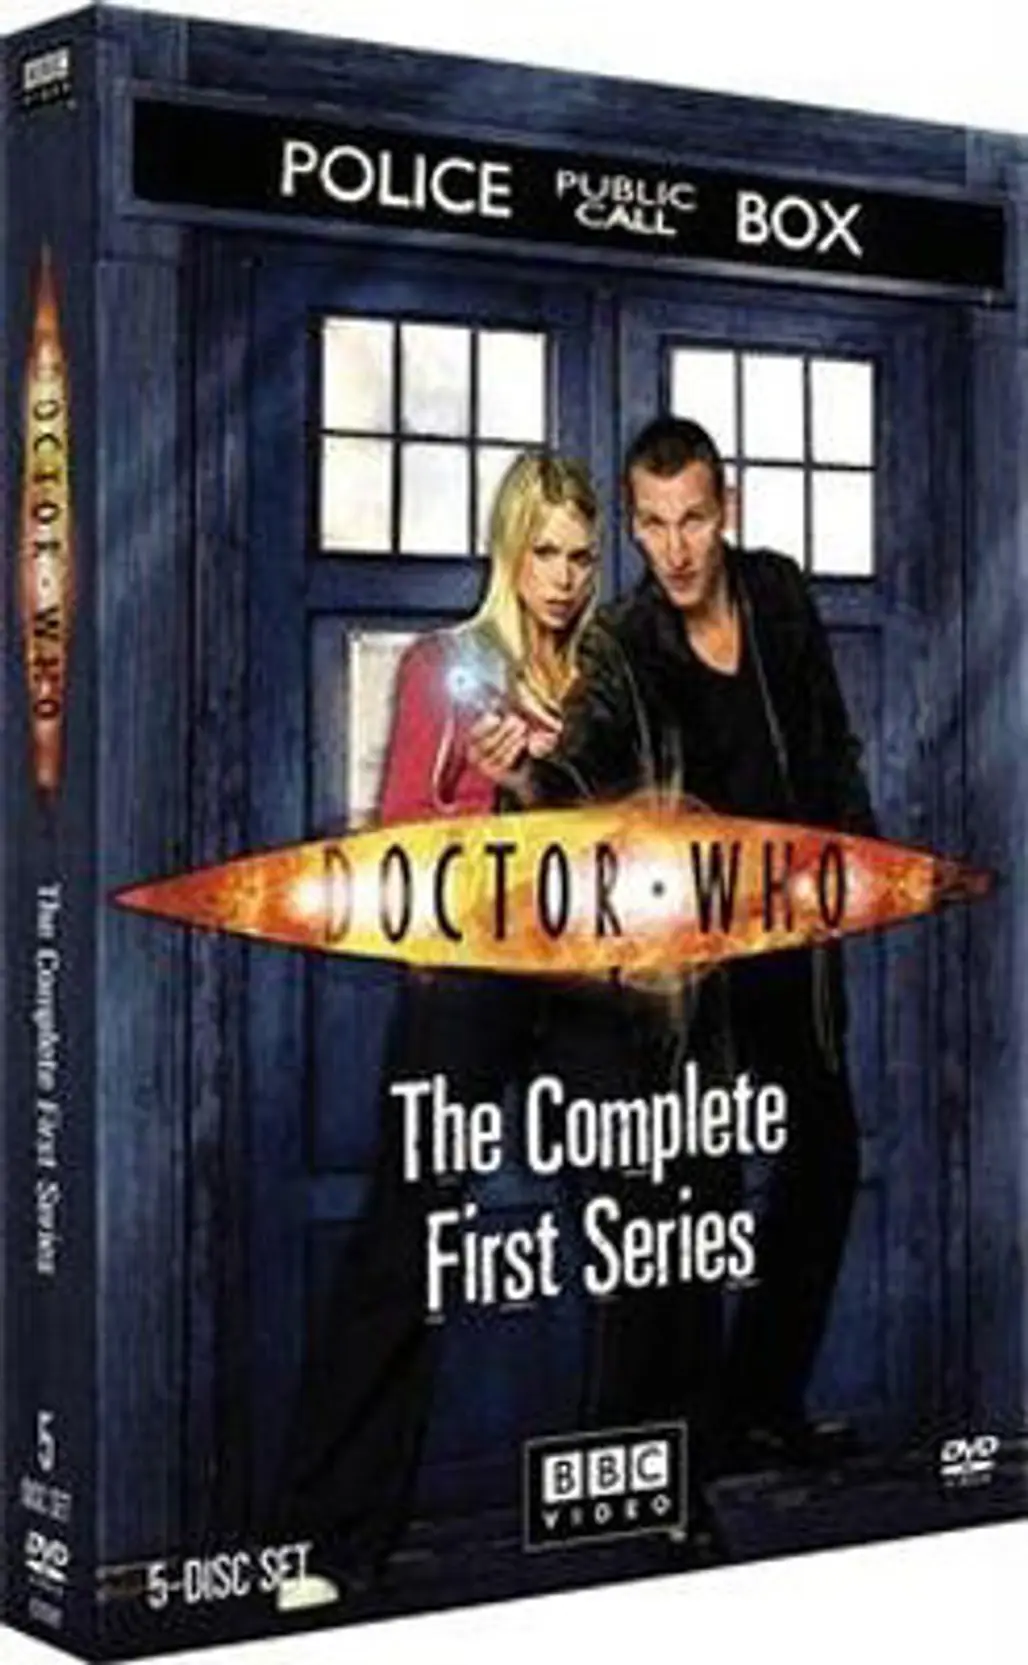 Doctor Who Series 1-4